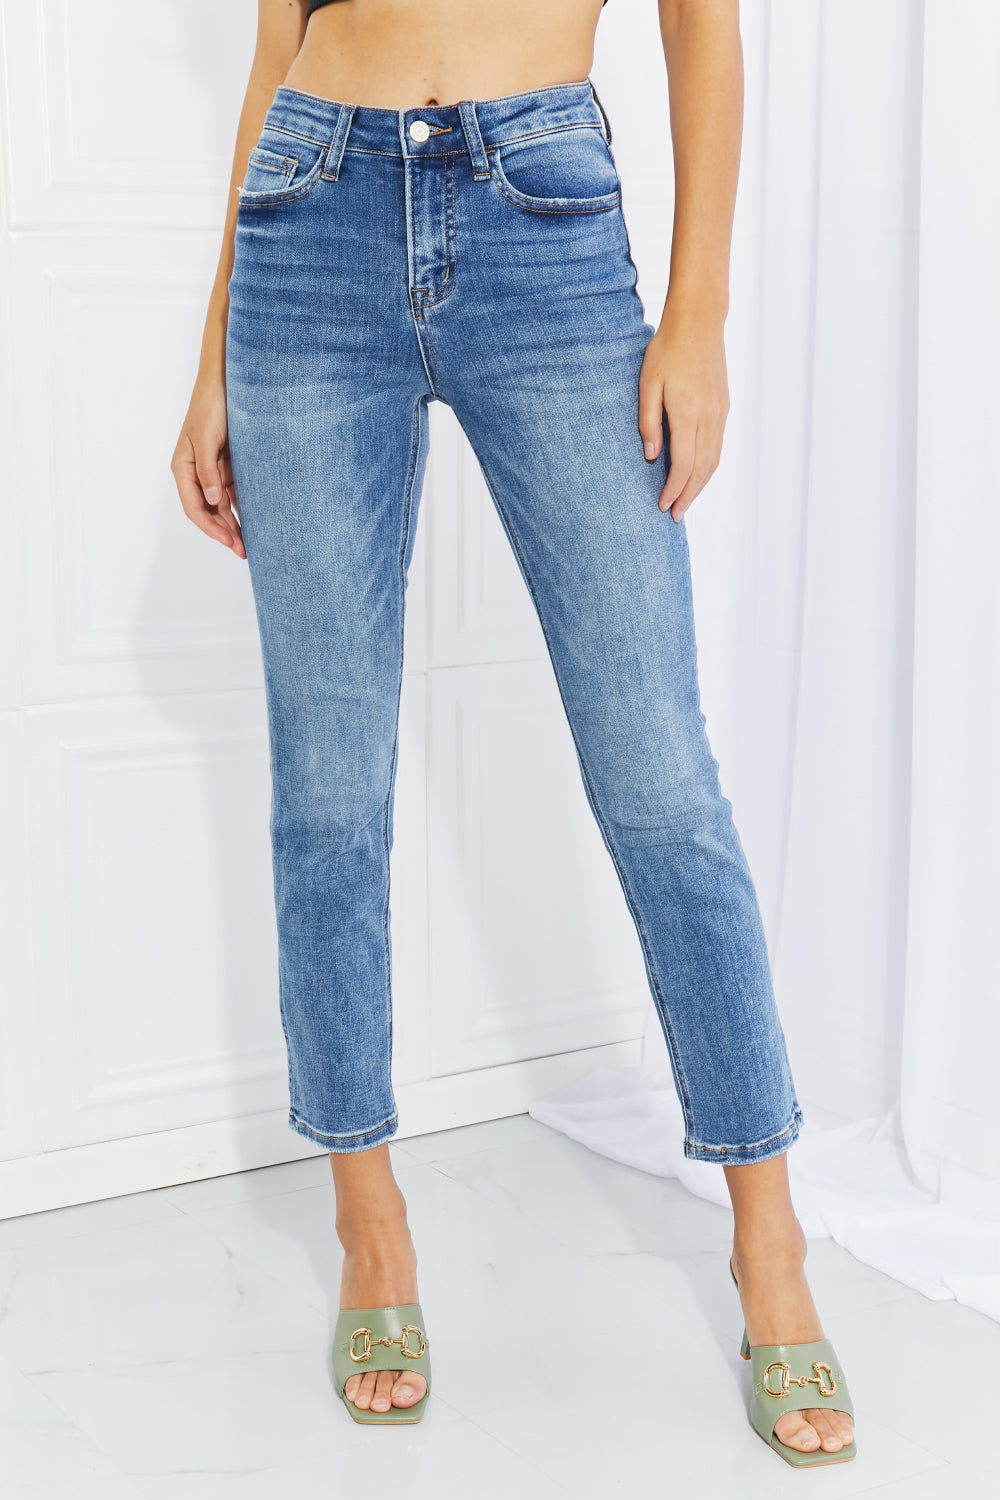 Lovervet Talk About It Full Size Cropped Jeans